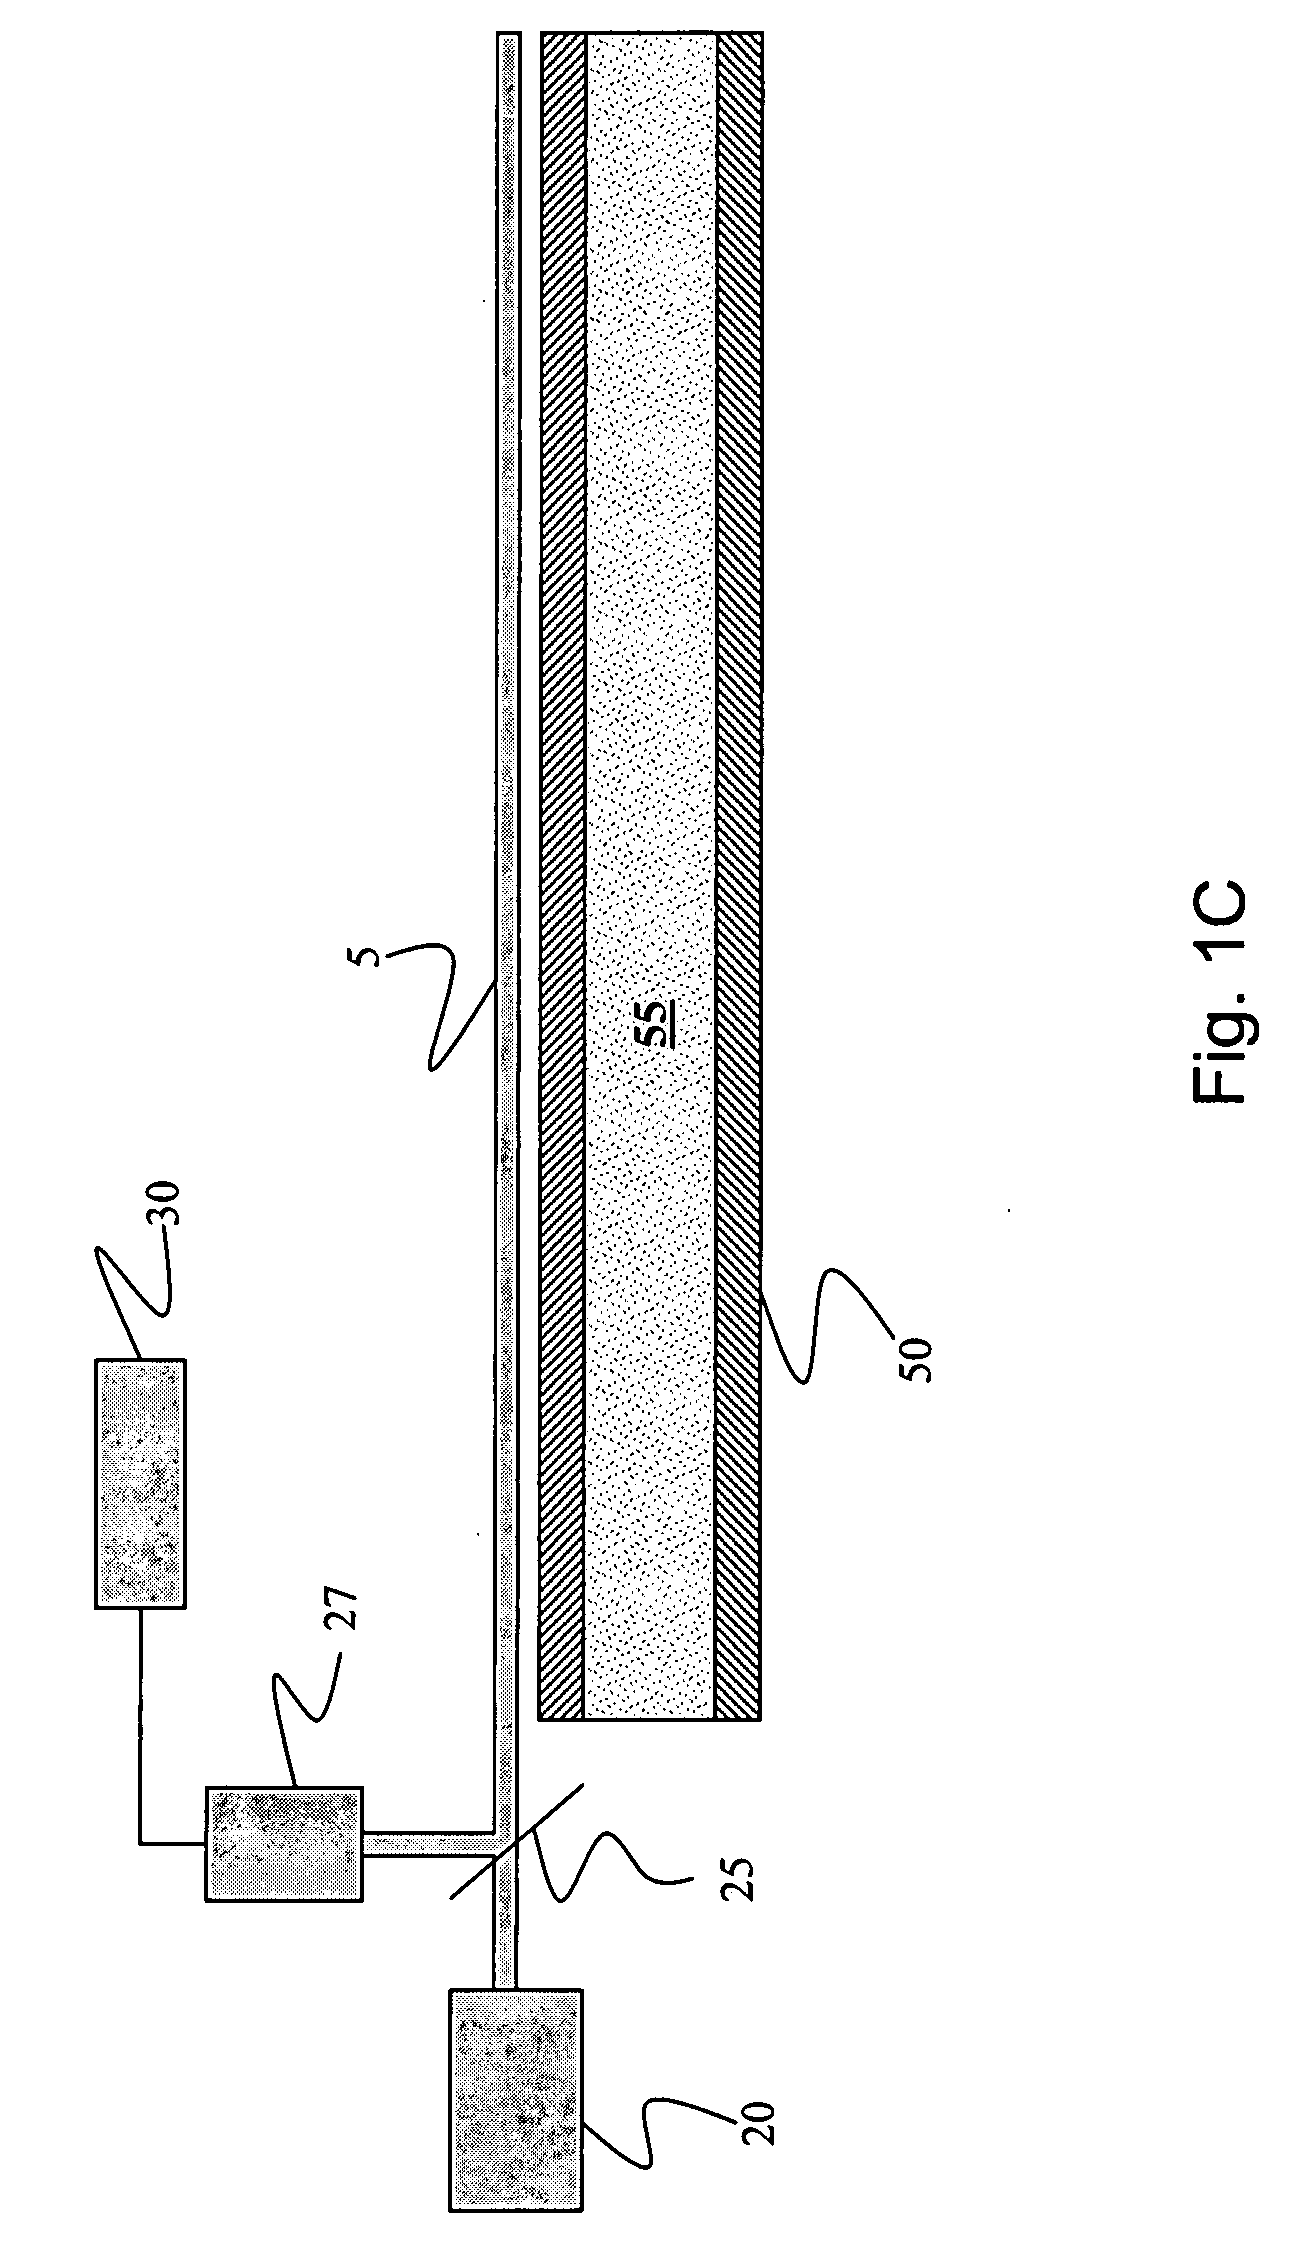 Systems and methods for distributed interferometric acoustic monitoring